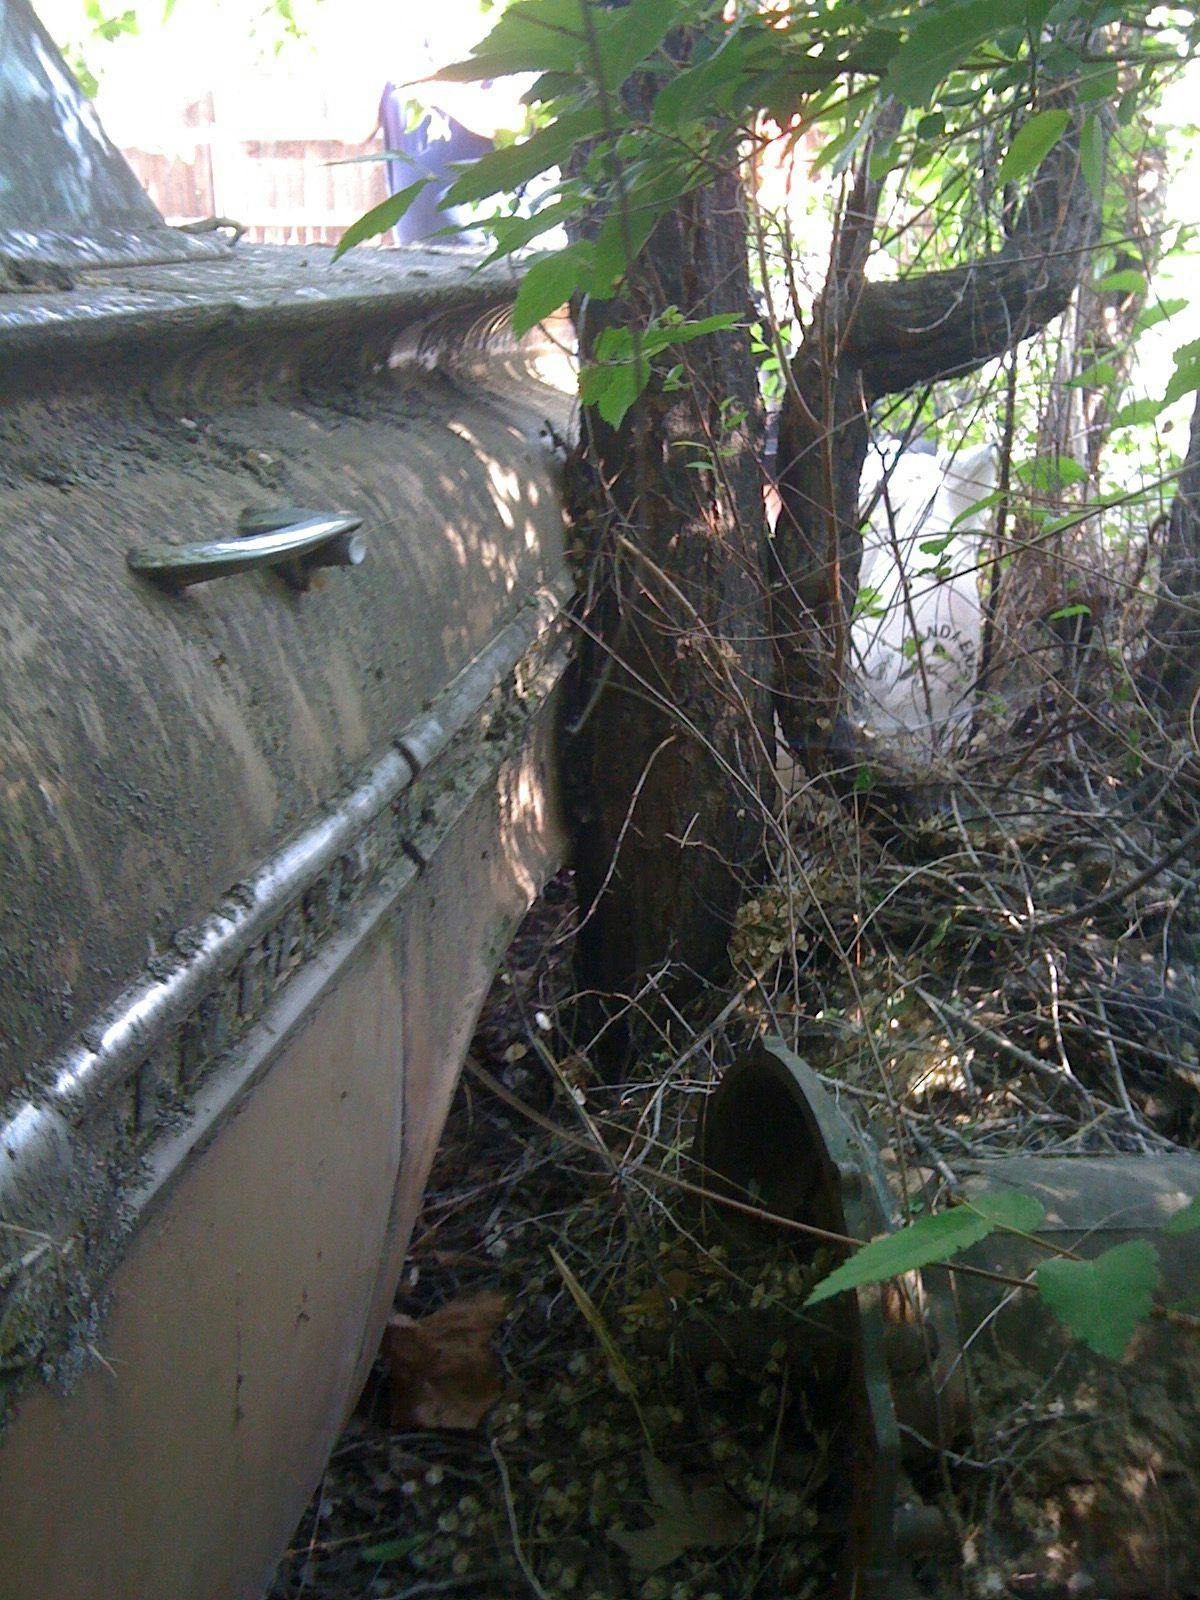 1959 Chevrolet Impala side and tree unrestored